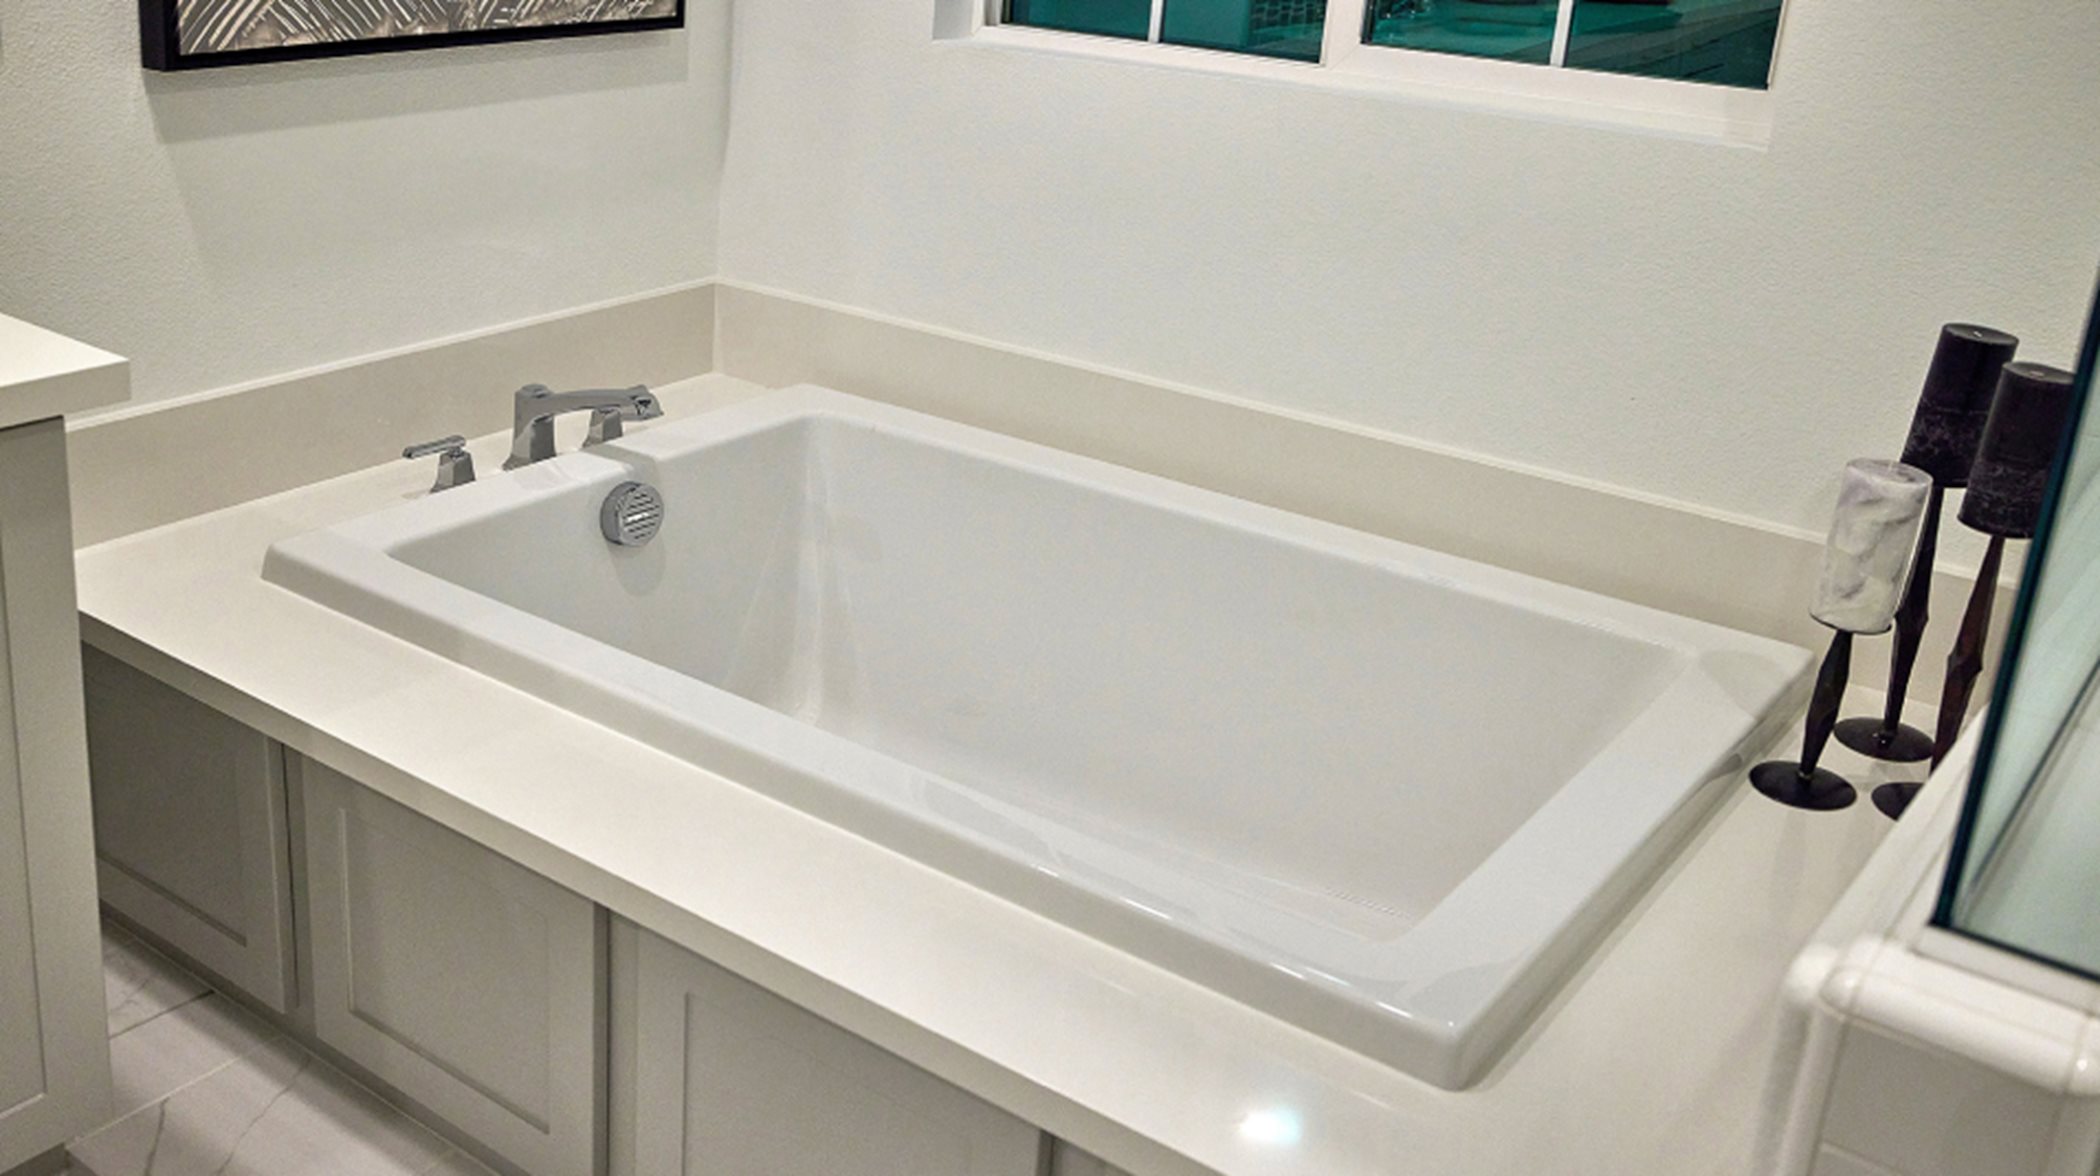 A separate soaking tub offers a luxurious experience